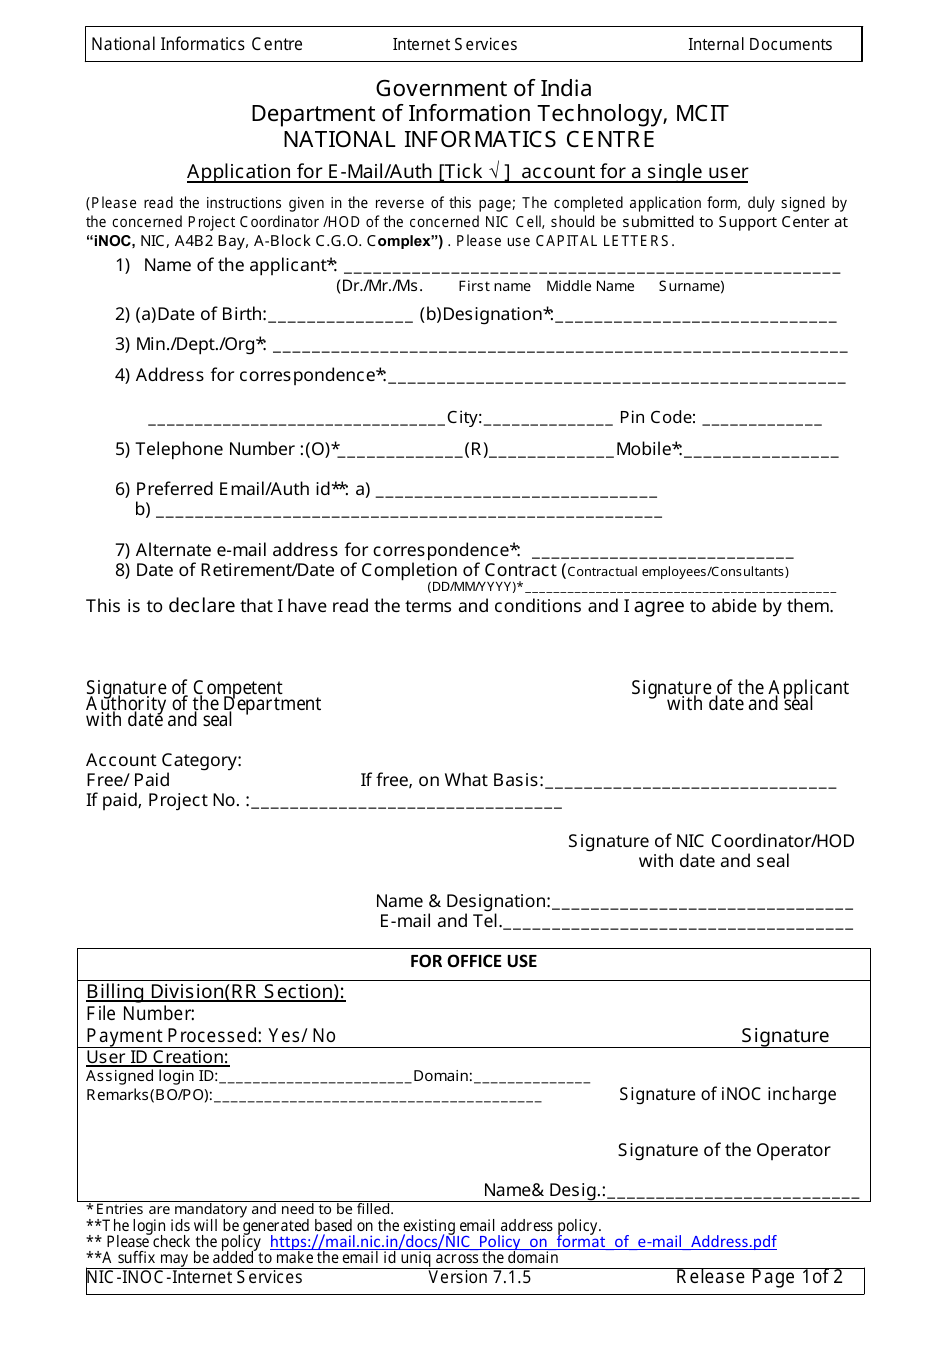 Application Form for E-Mail / Auth - Account for a Single User - India, Page 1